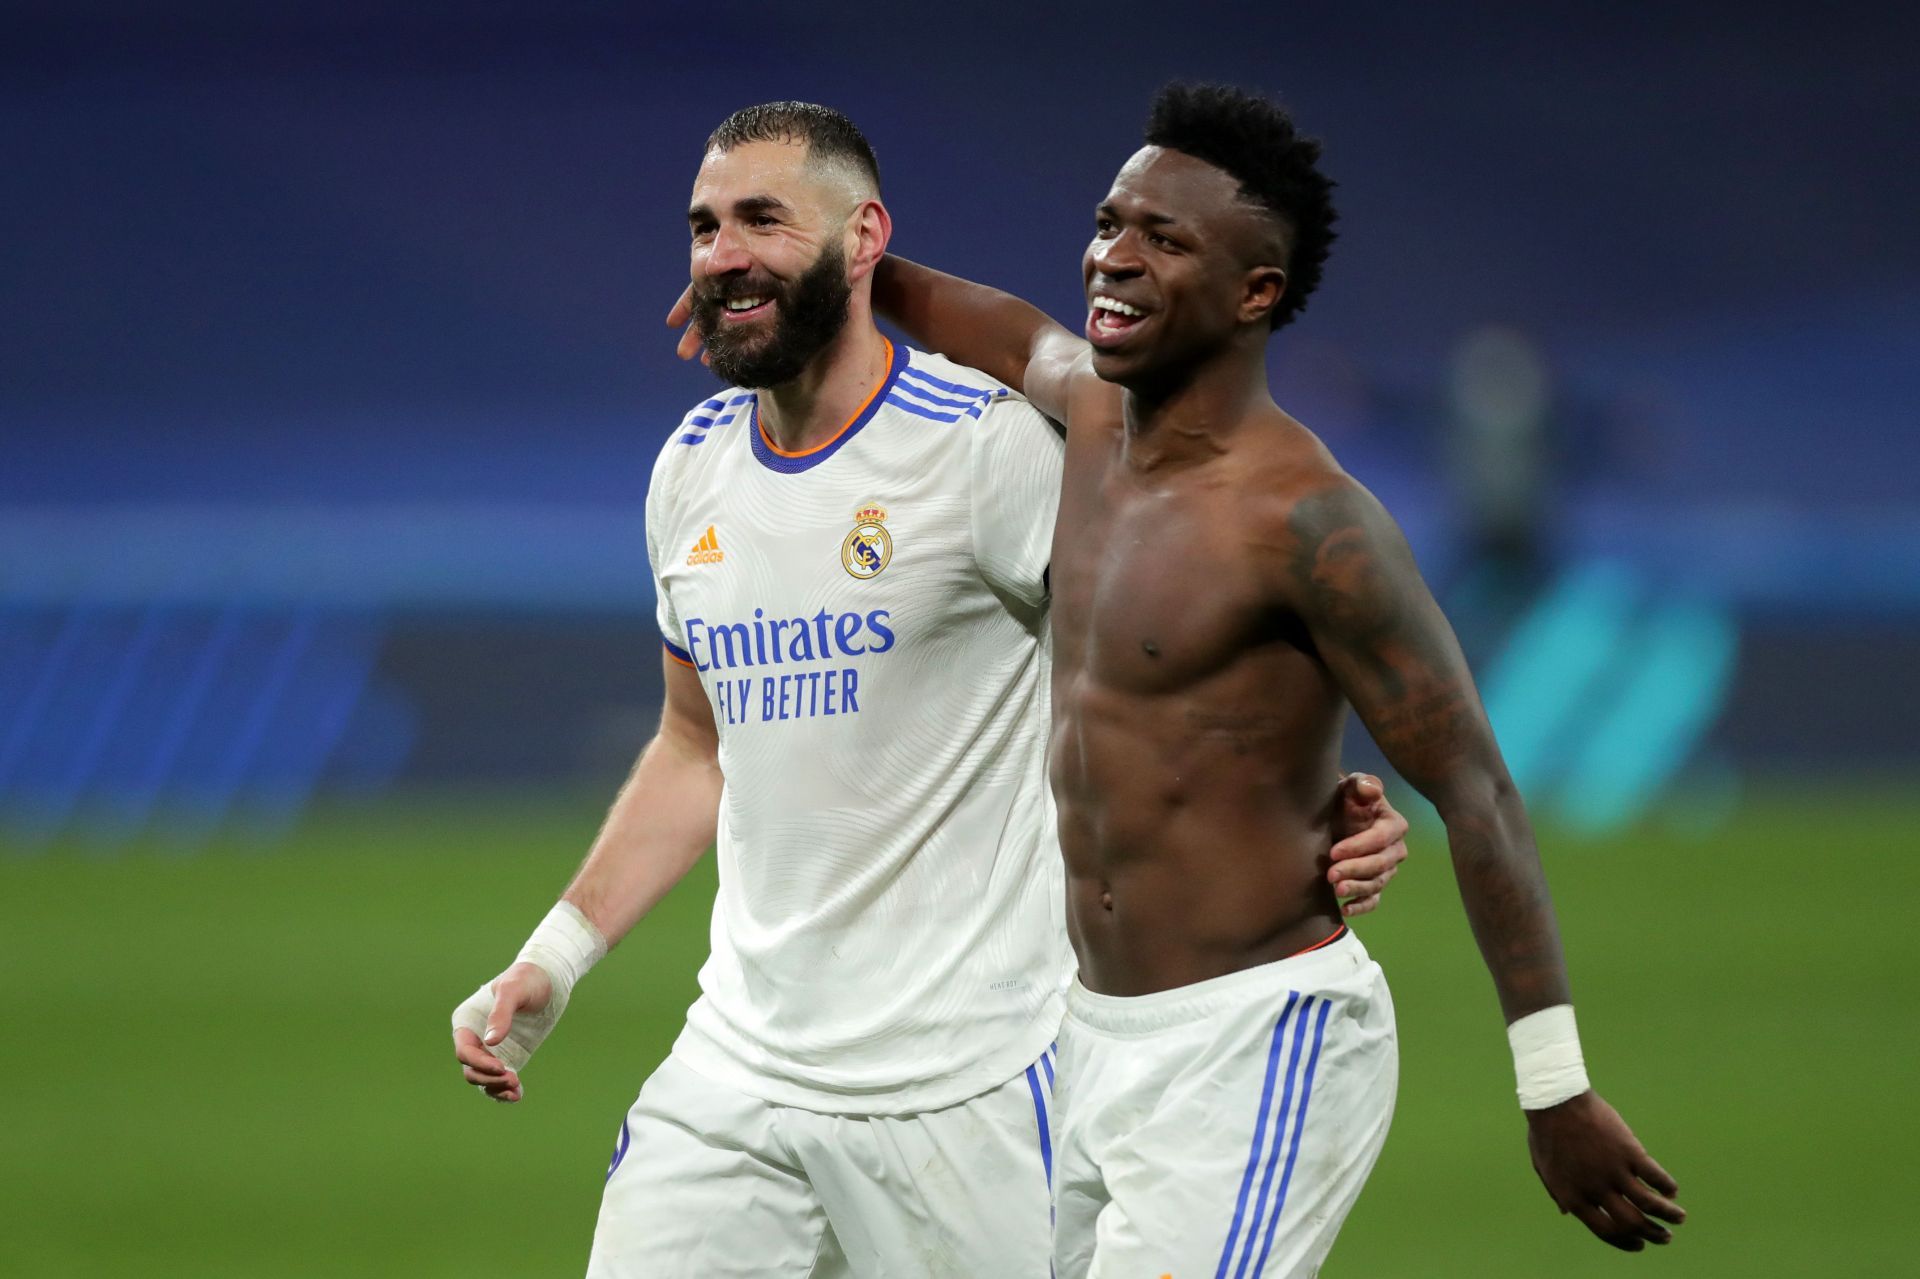 Vinicius and Benzema have scored the most goals for Real Madrid this season